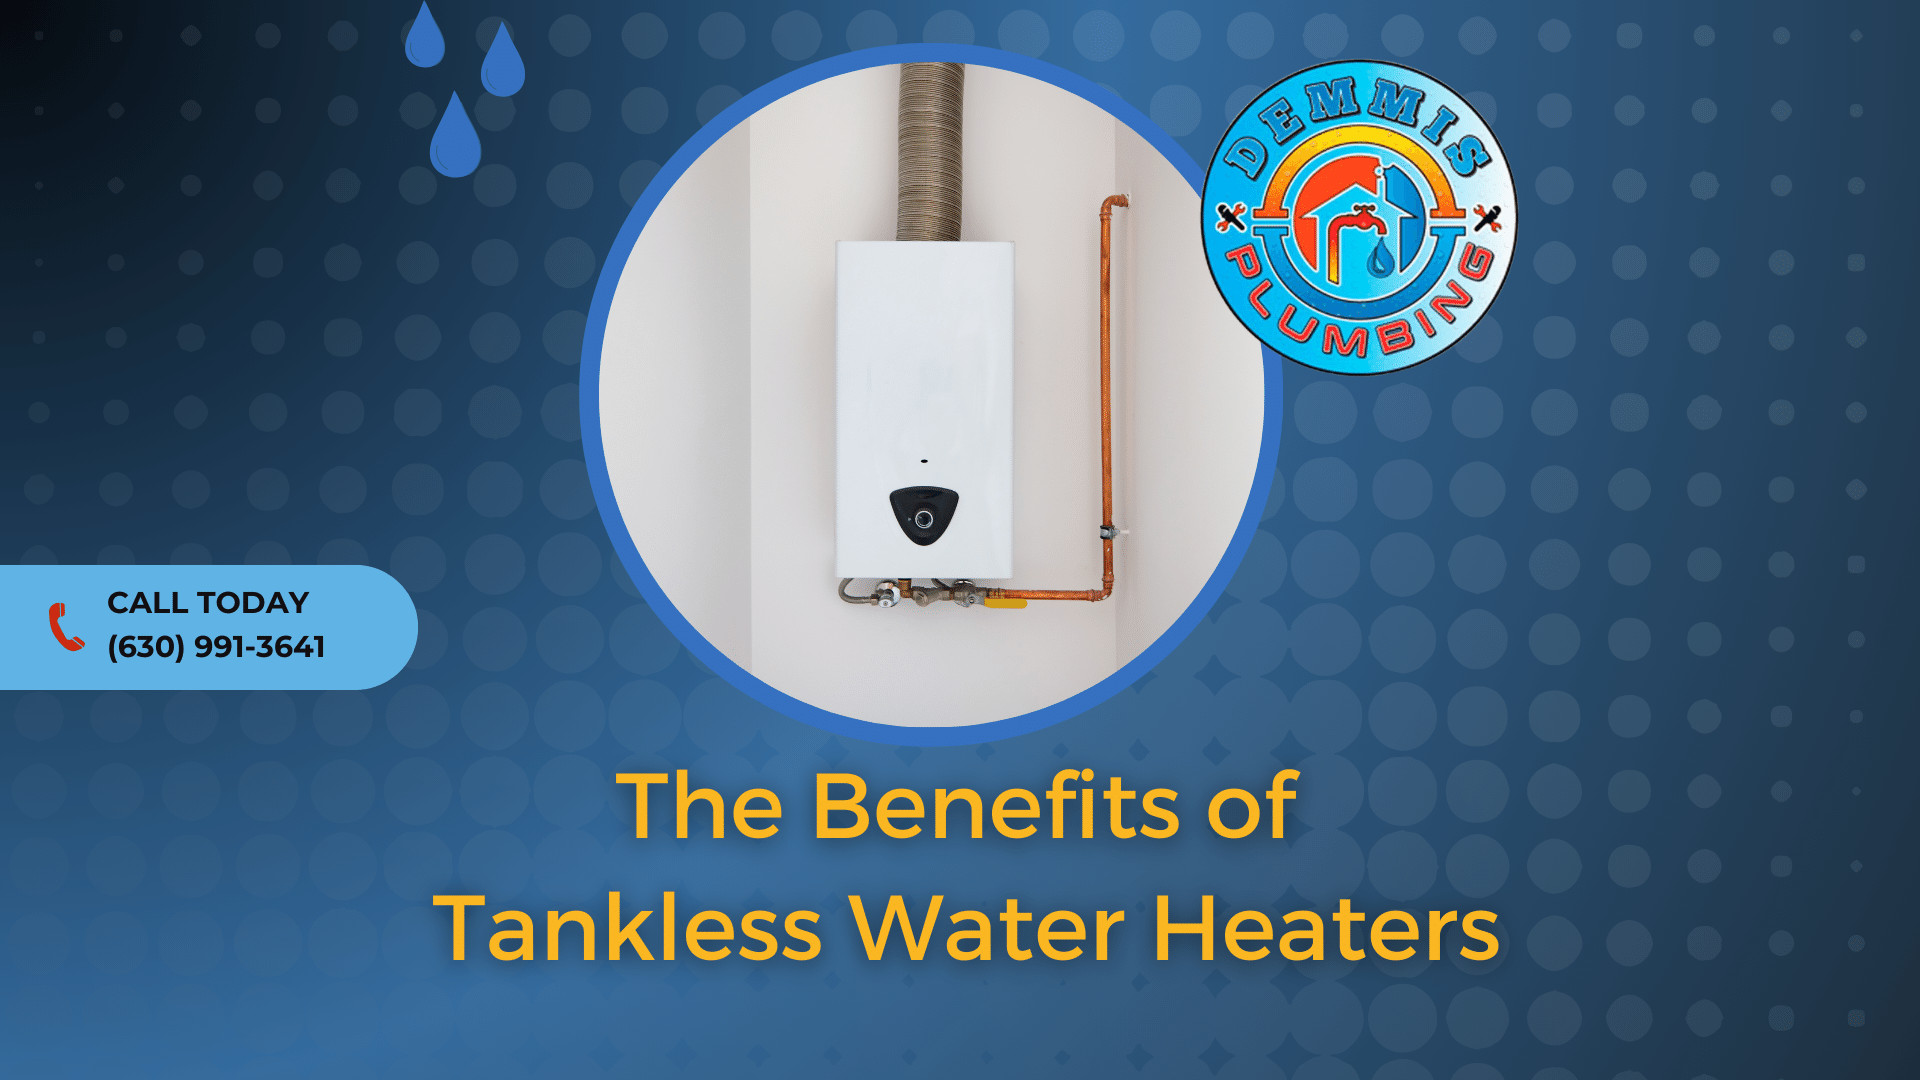 The Benefits of Tankless Water Heaters